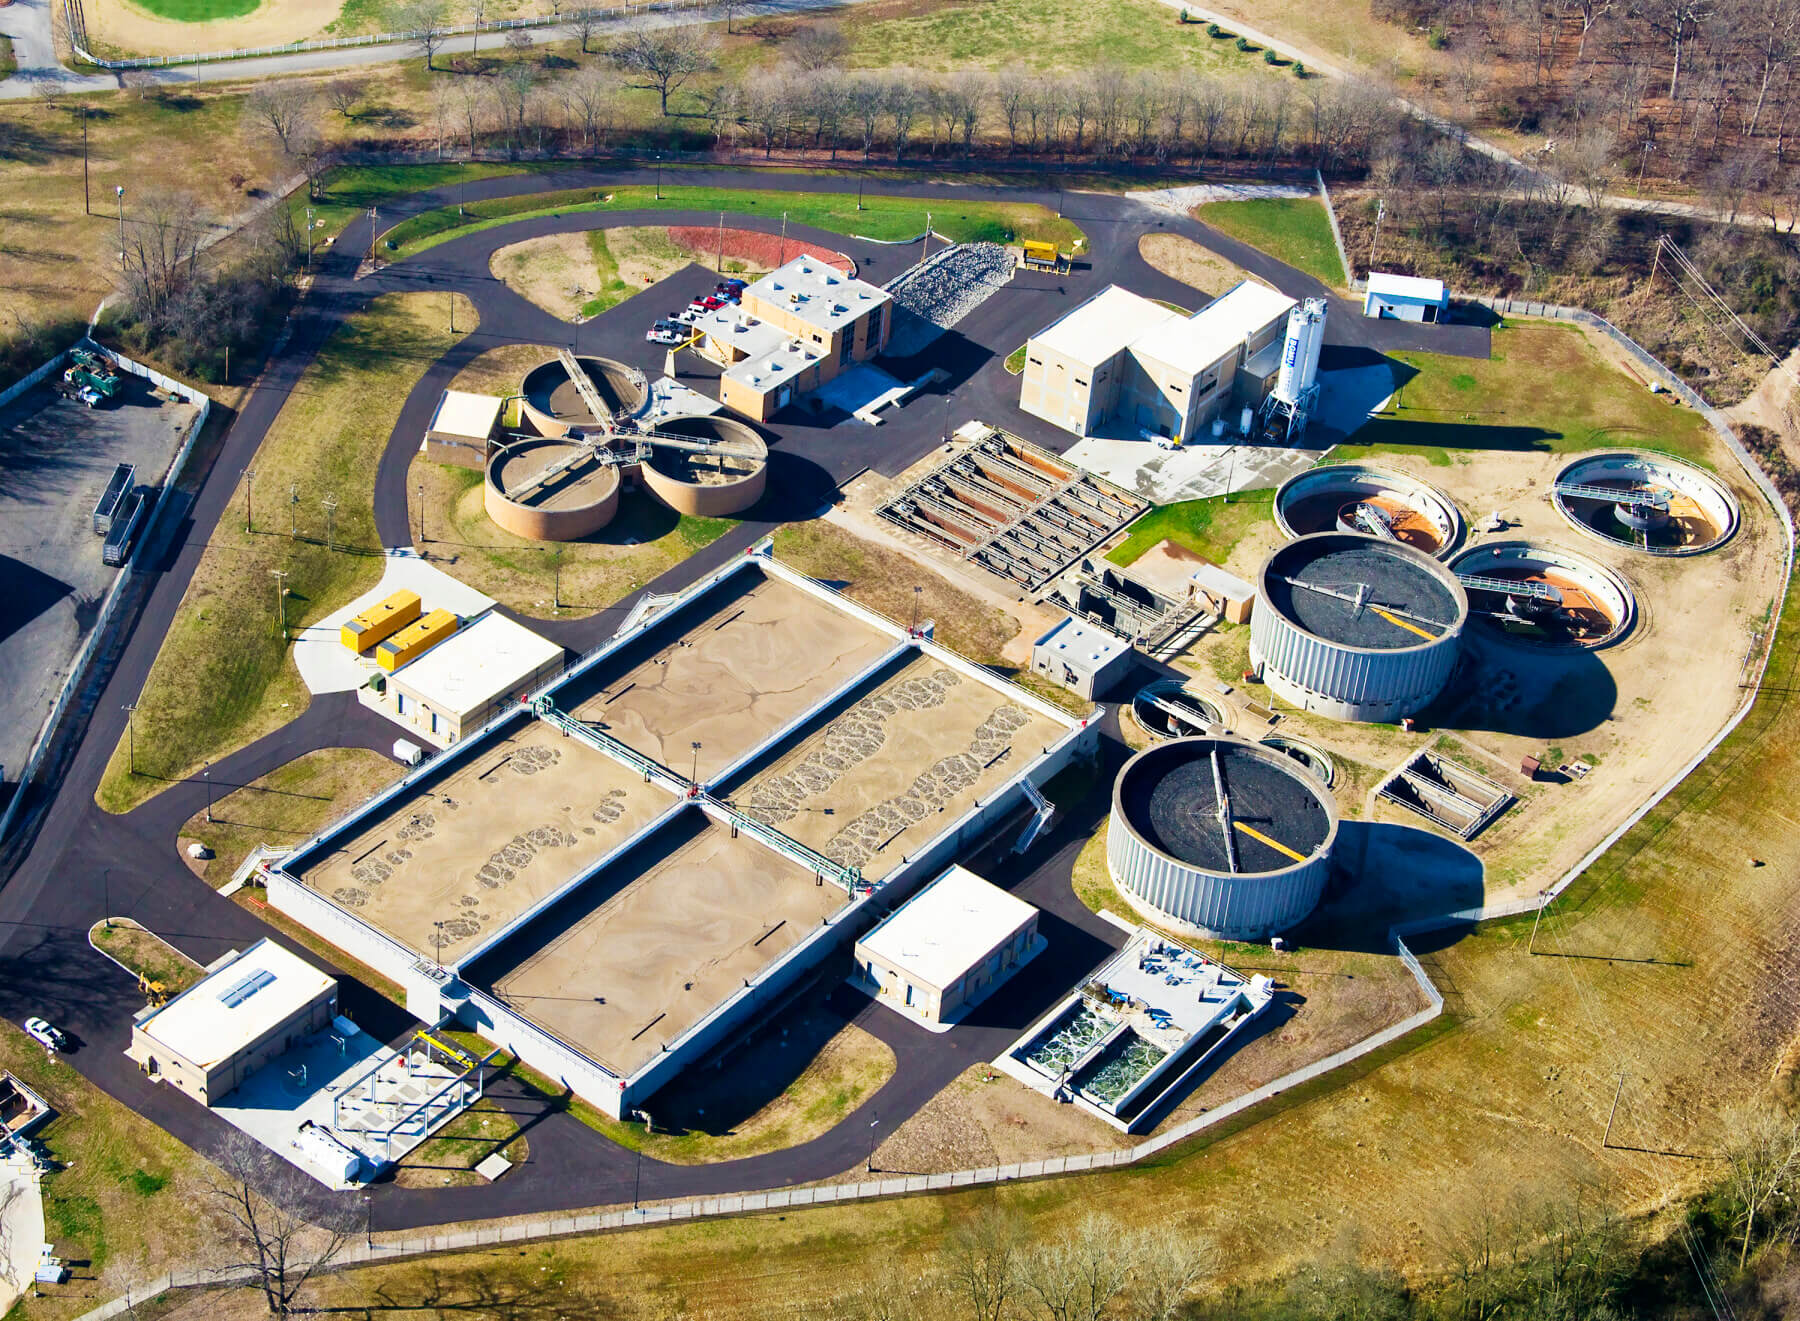 An aerial view of the wastewater treatment plant